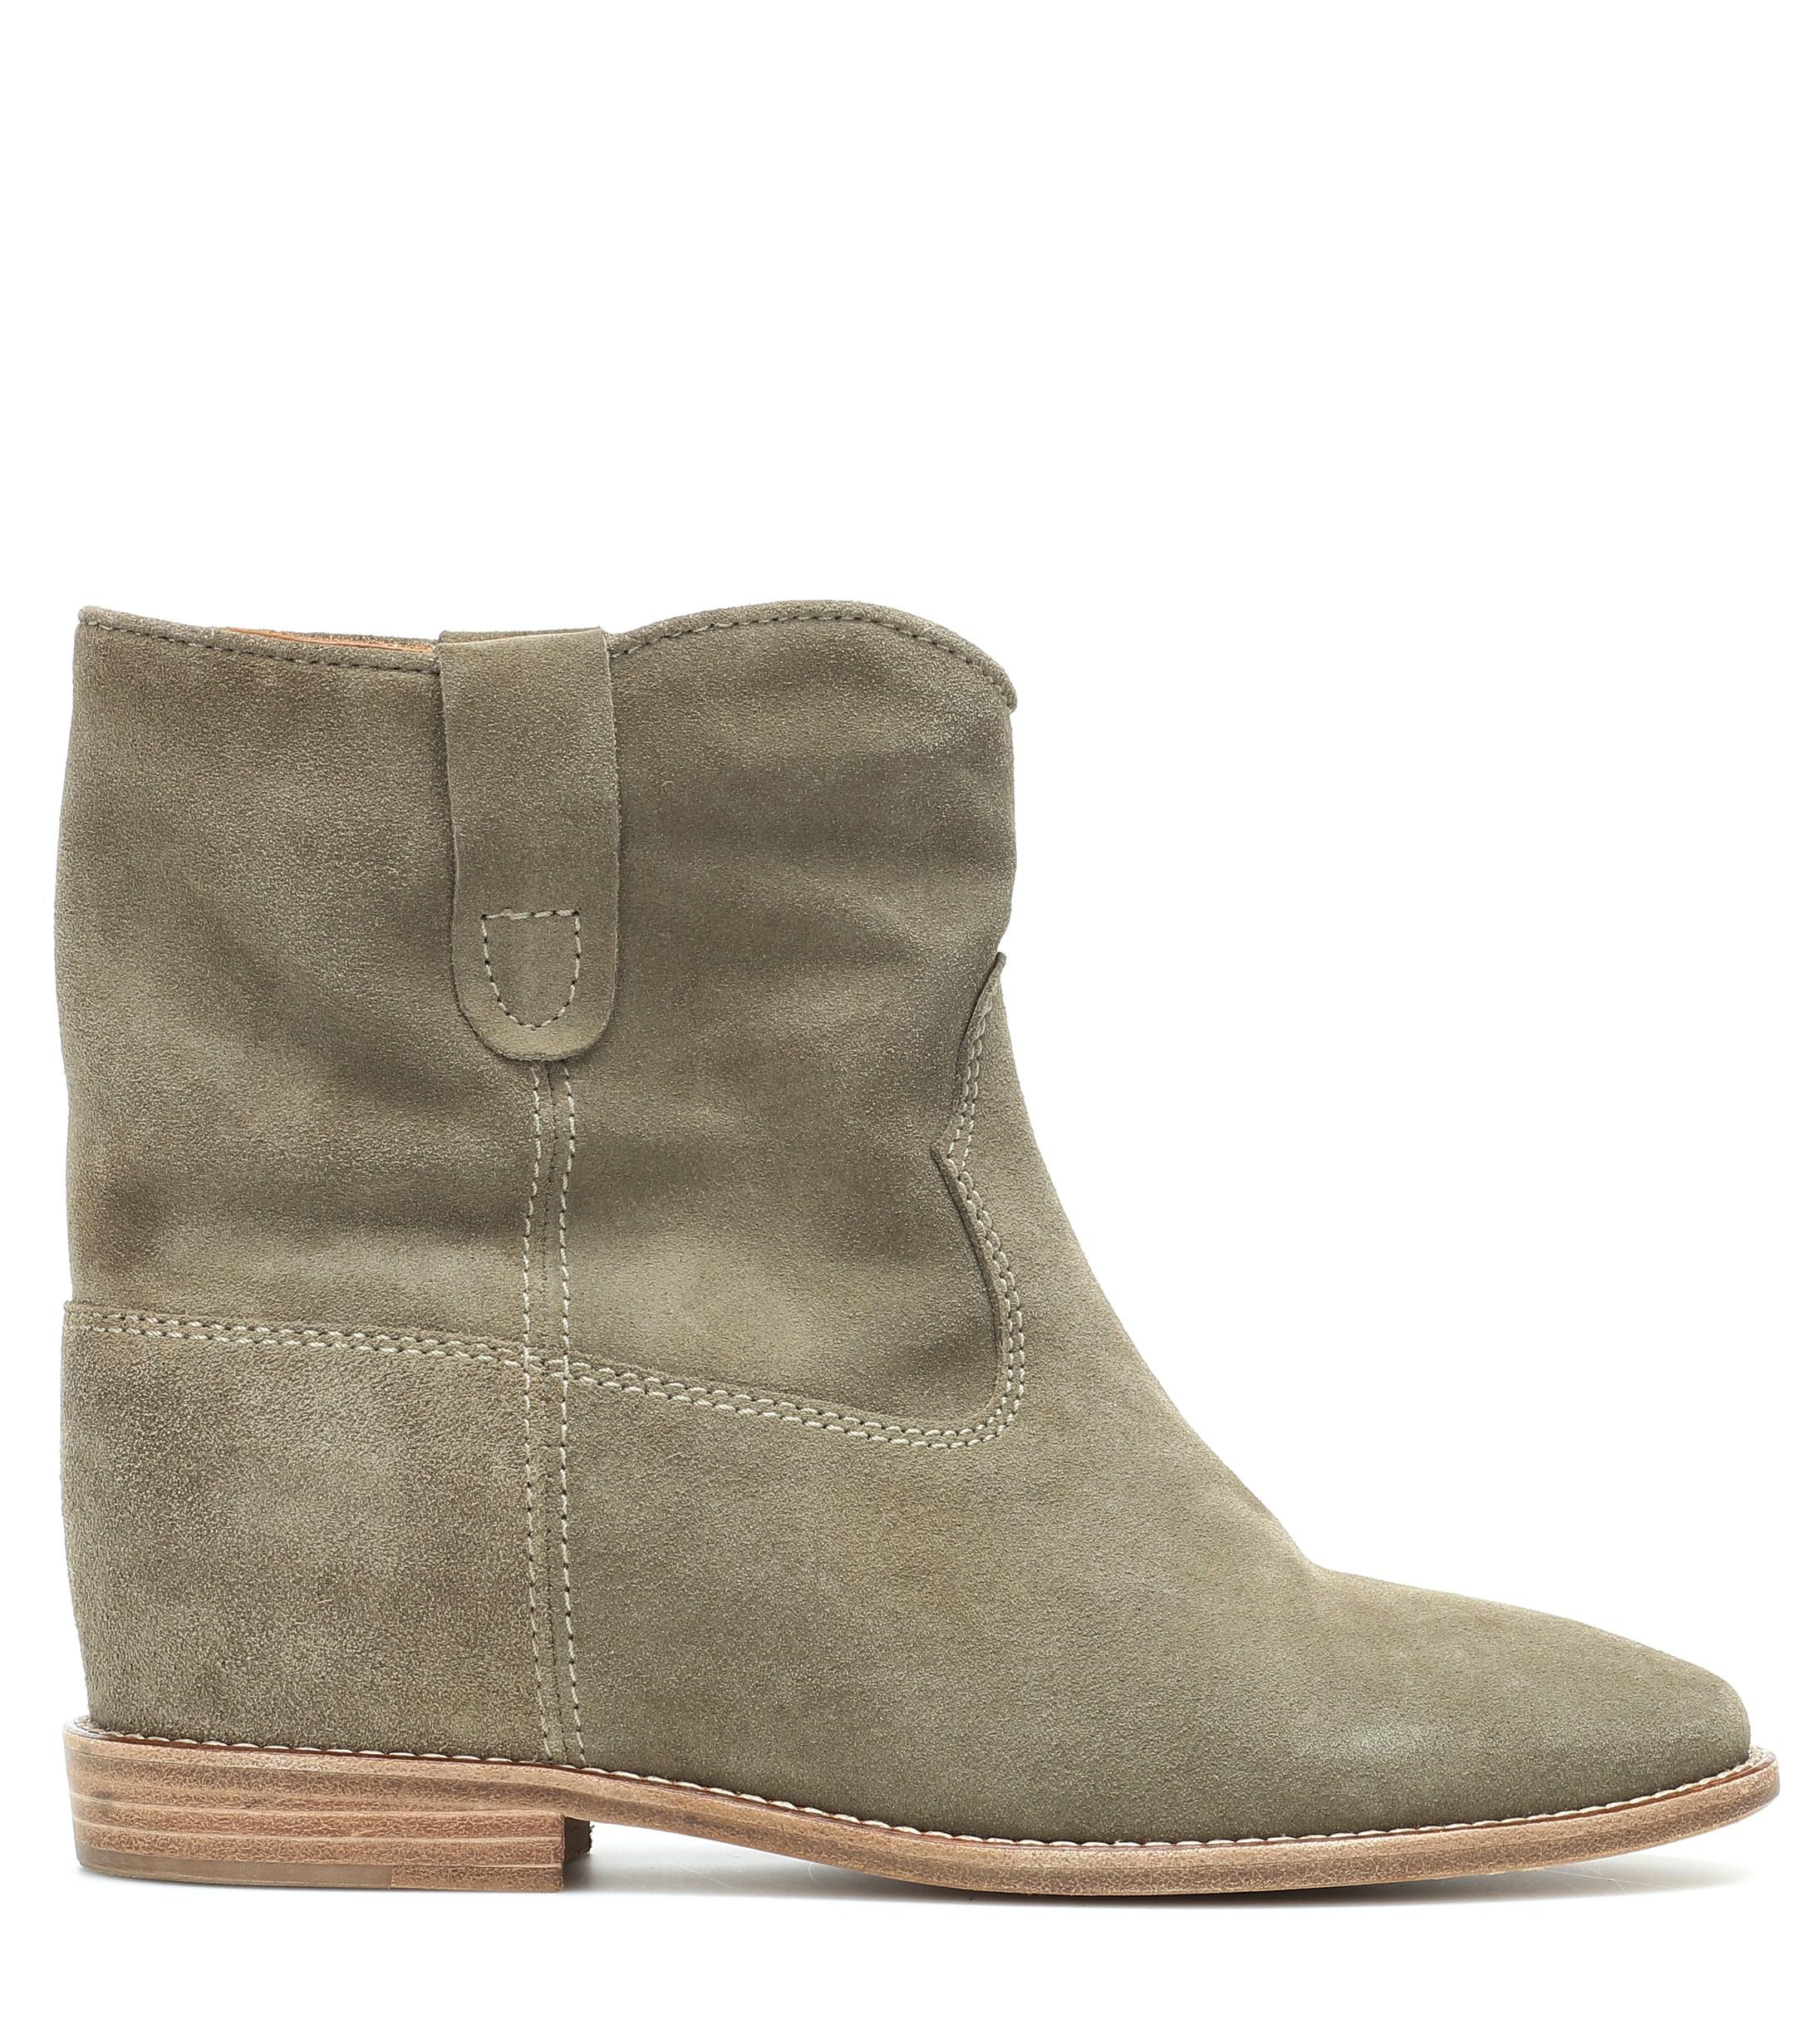 Isabel Marant Crisi Suede Ankle Boots in Green - Save 30% - Lyst